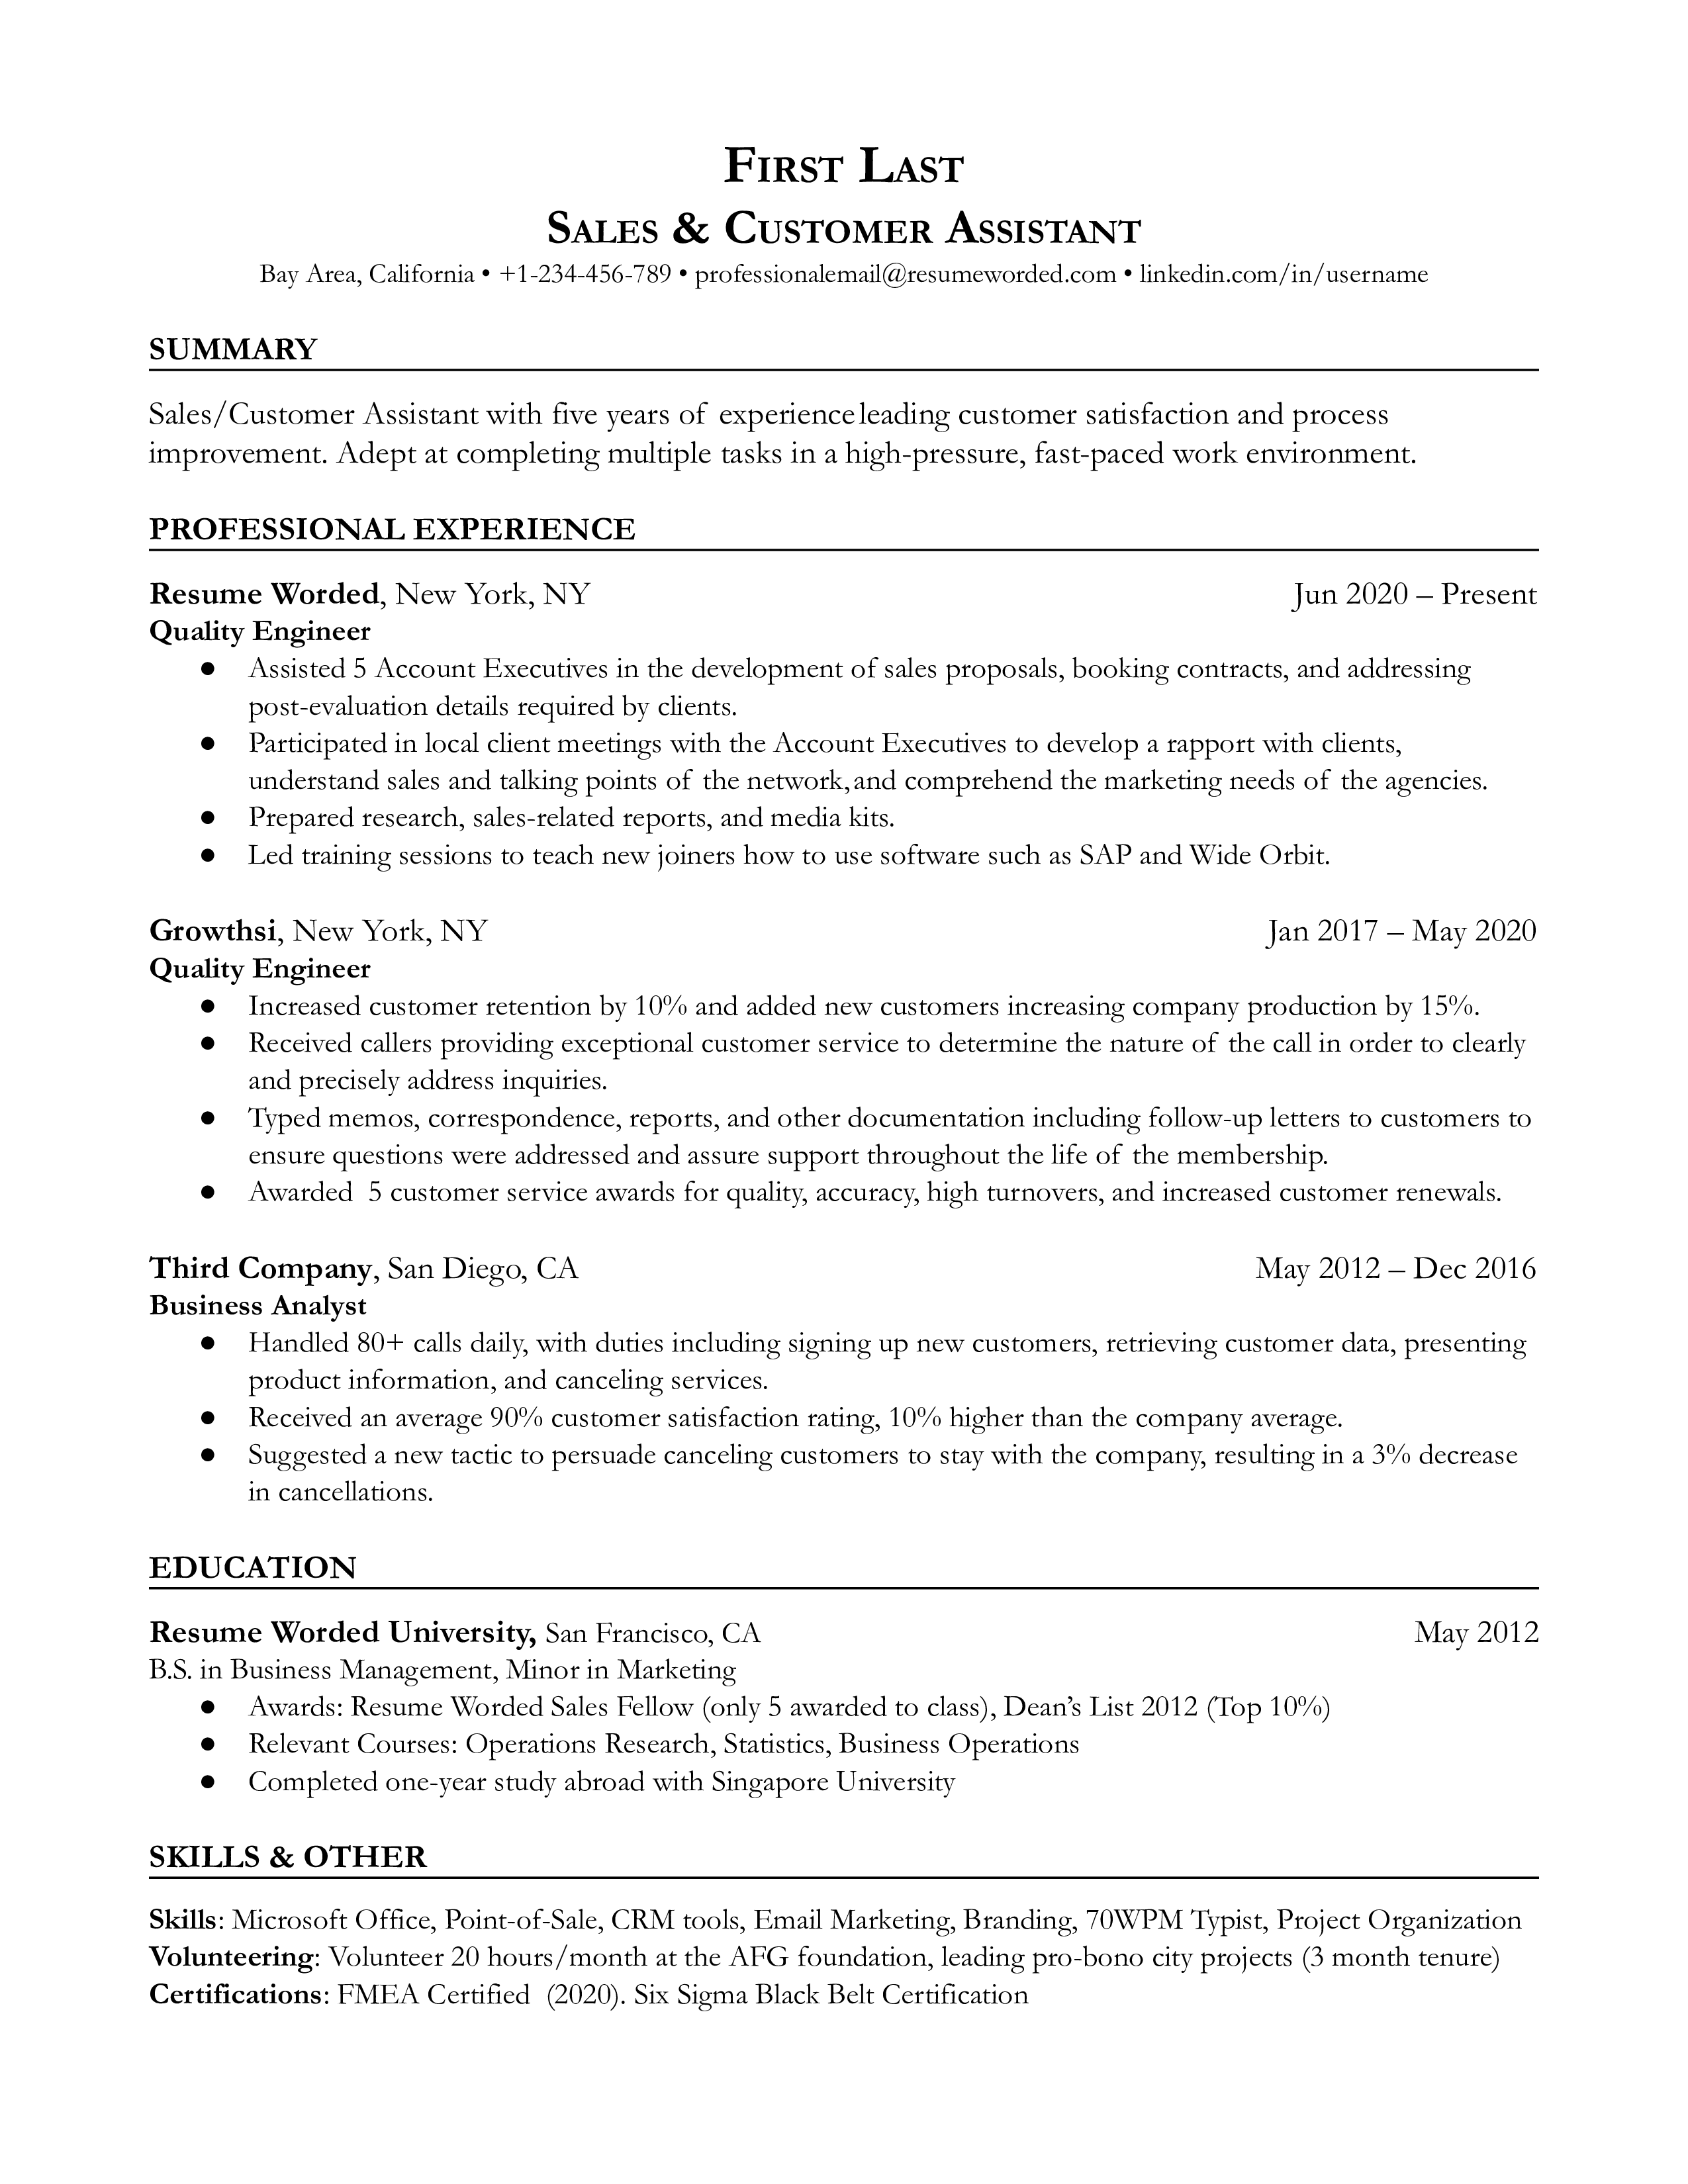 Sales/Customer Assistant Resume Template + Example